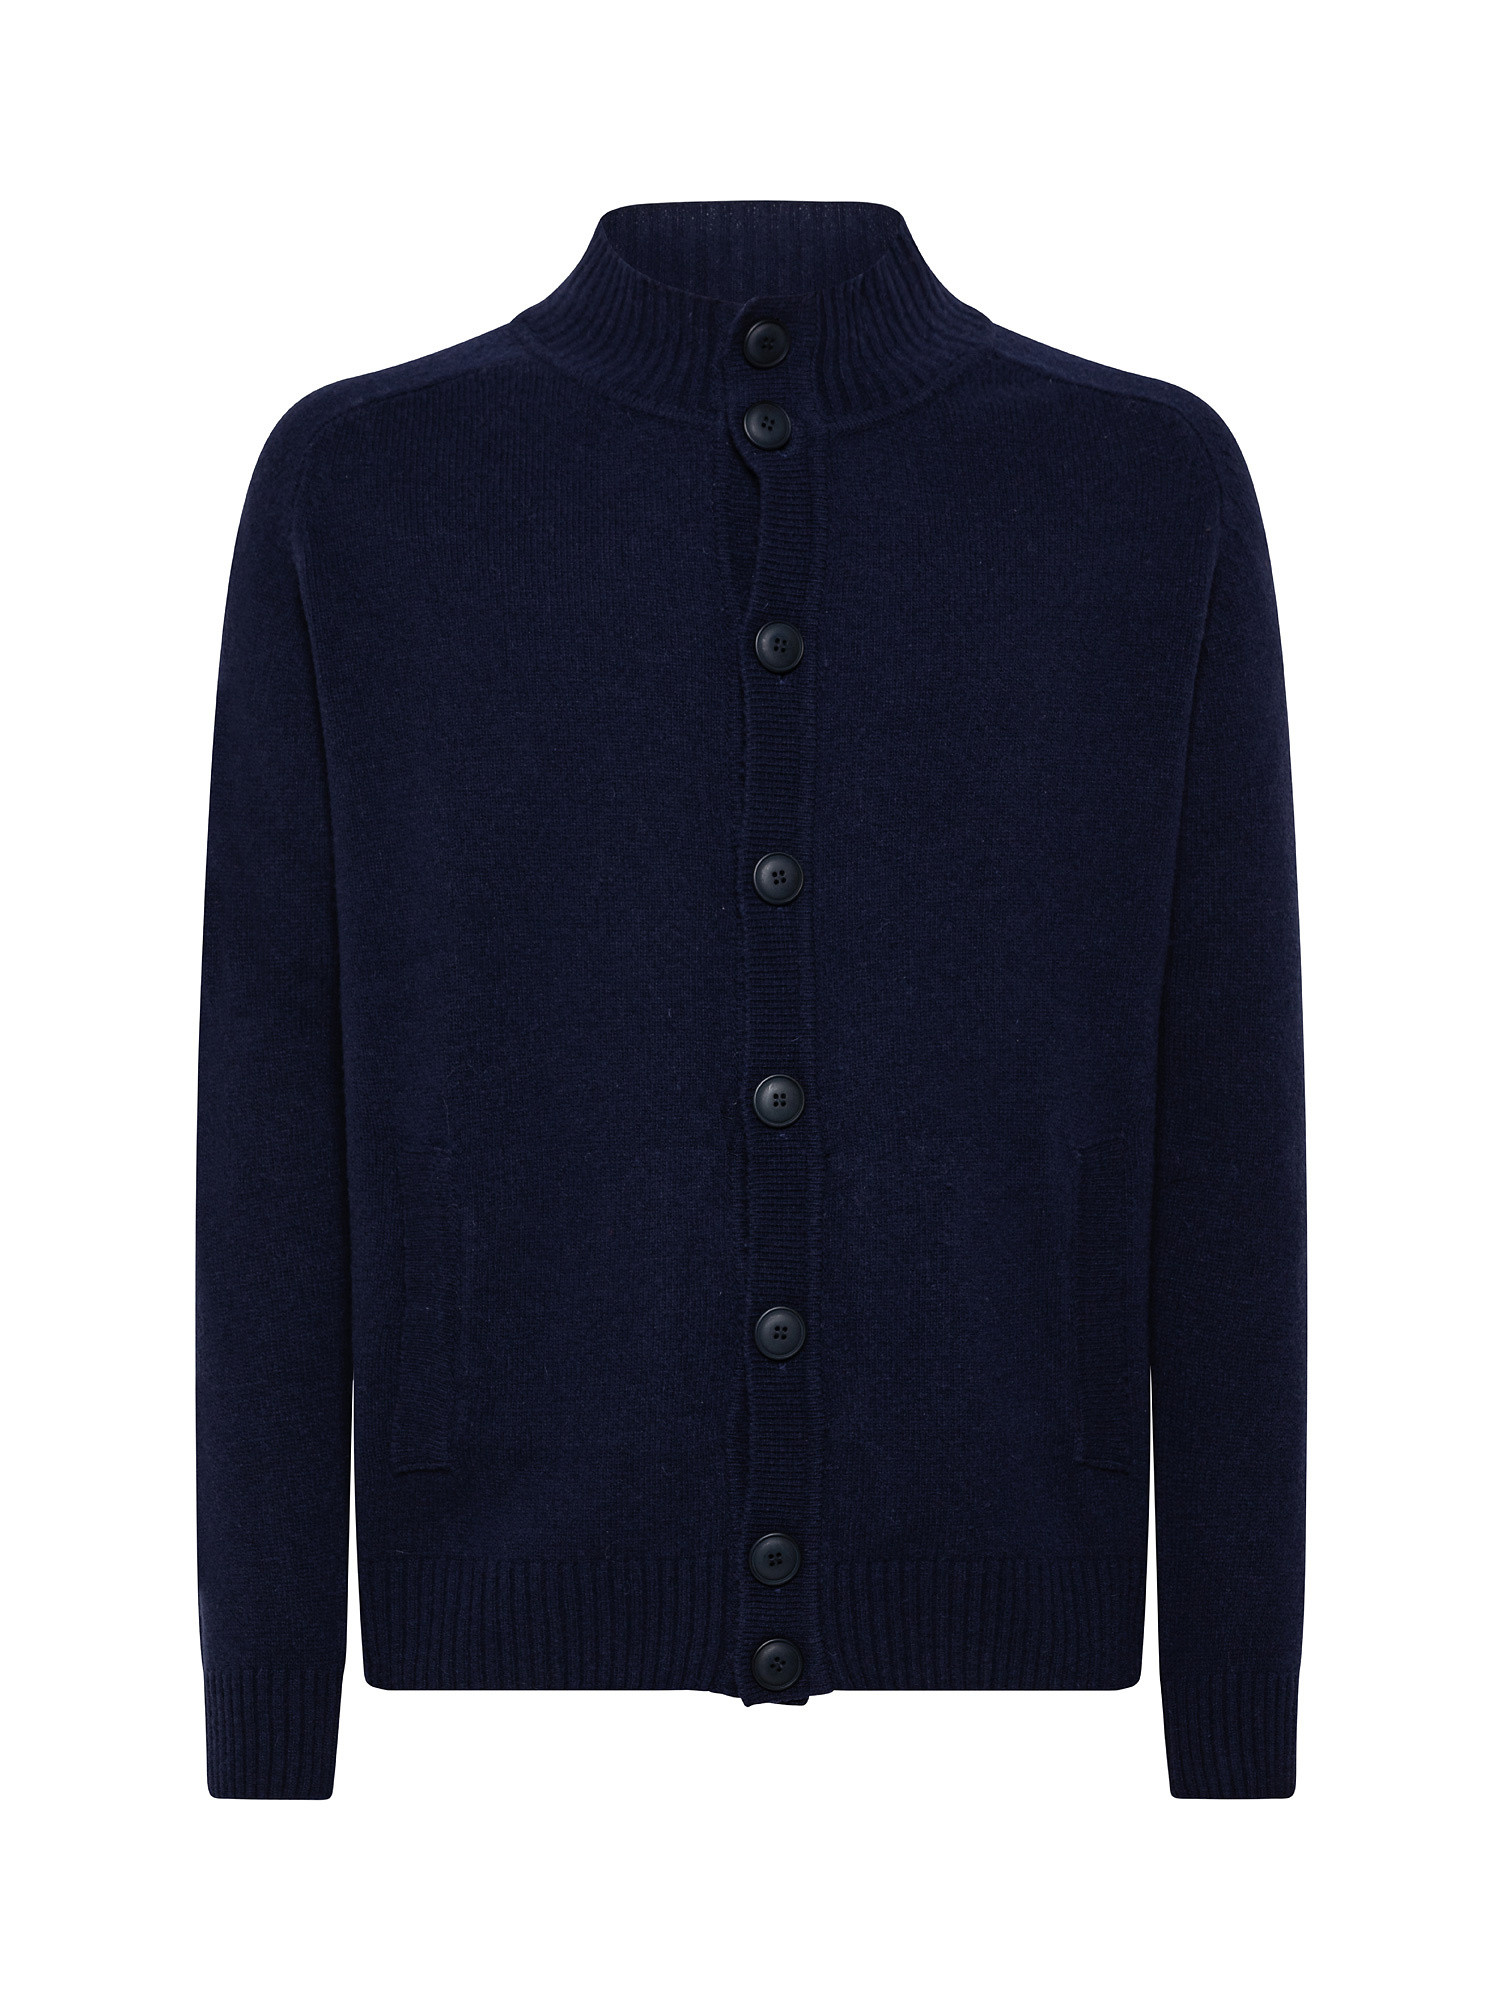 Wool blend cardigan with buttons, Dark Blue, large image number 0